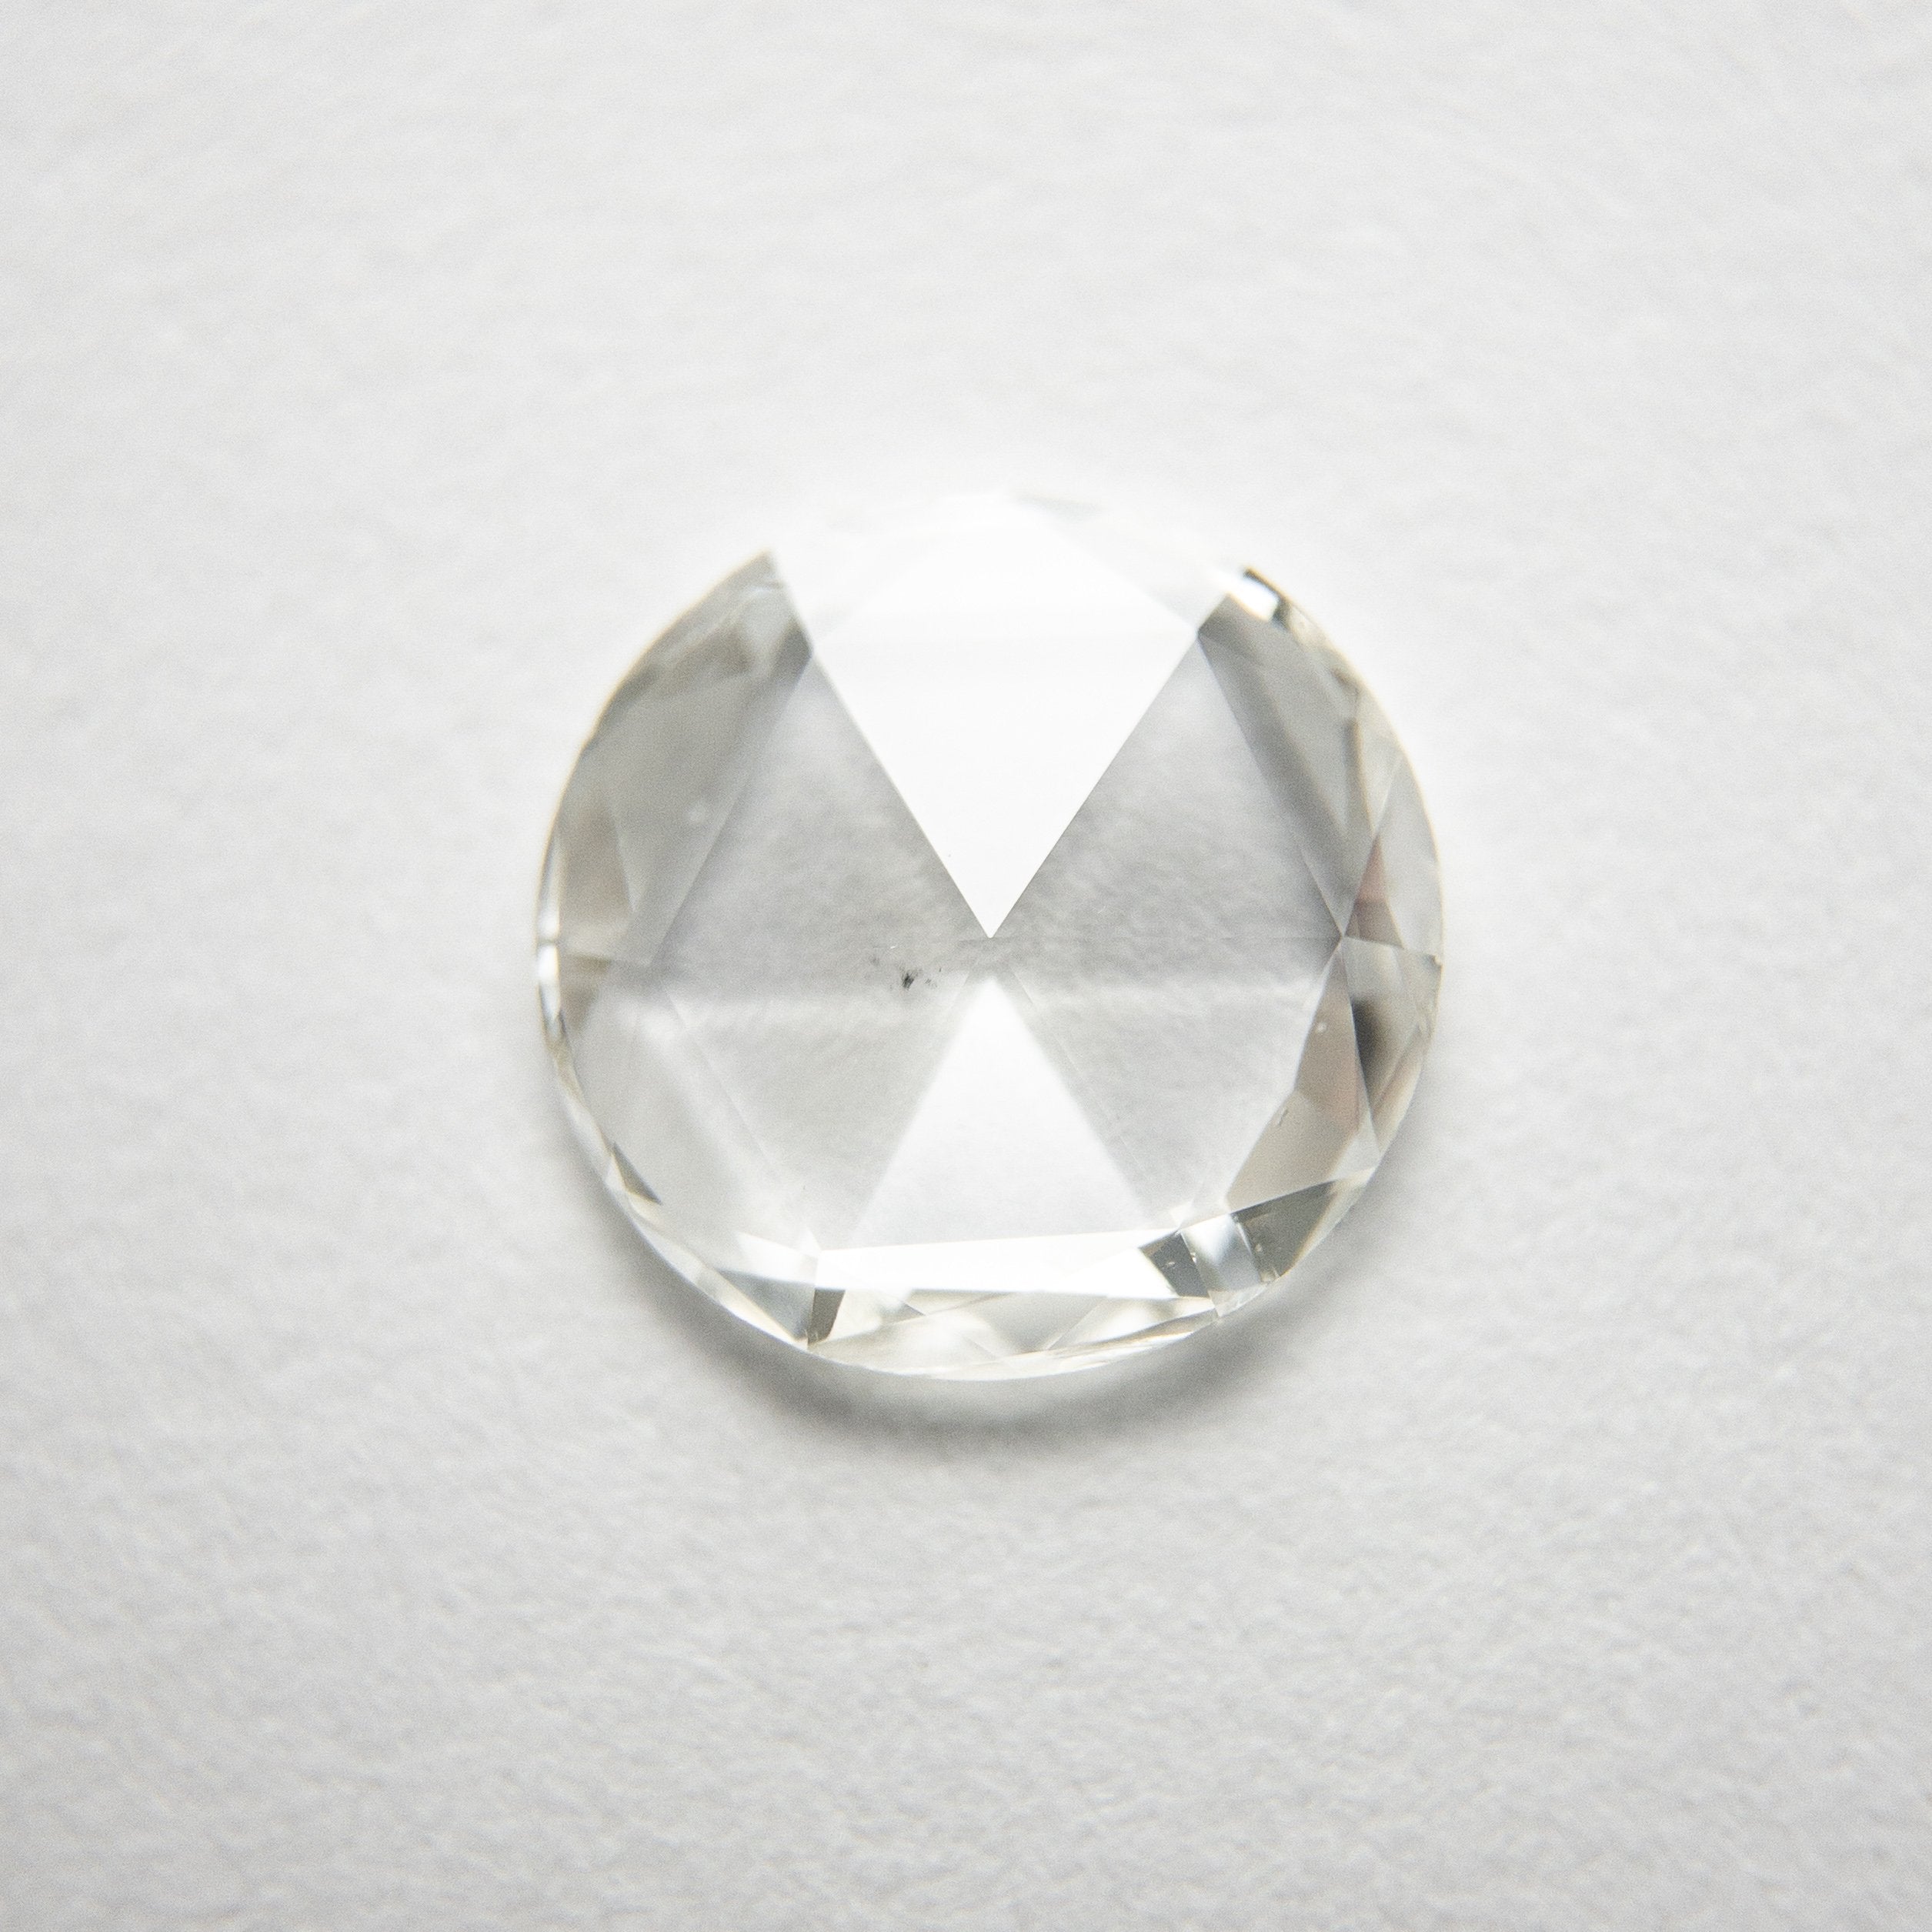 0.66ct 7.25x7.13x1.37mm SI1 H/I Round Rosecut 18284-01 Hold D1955